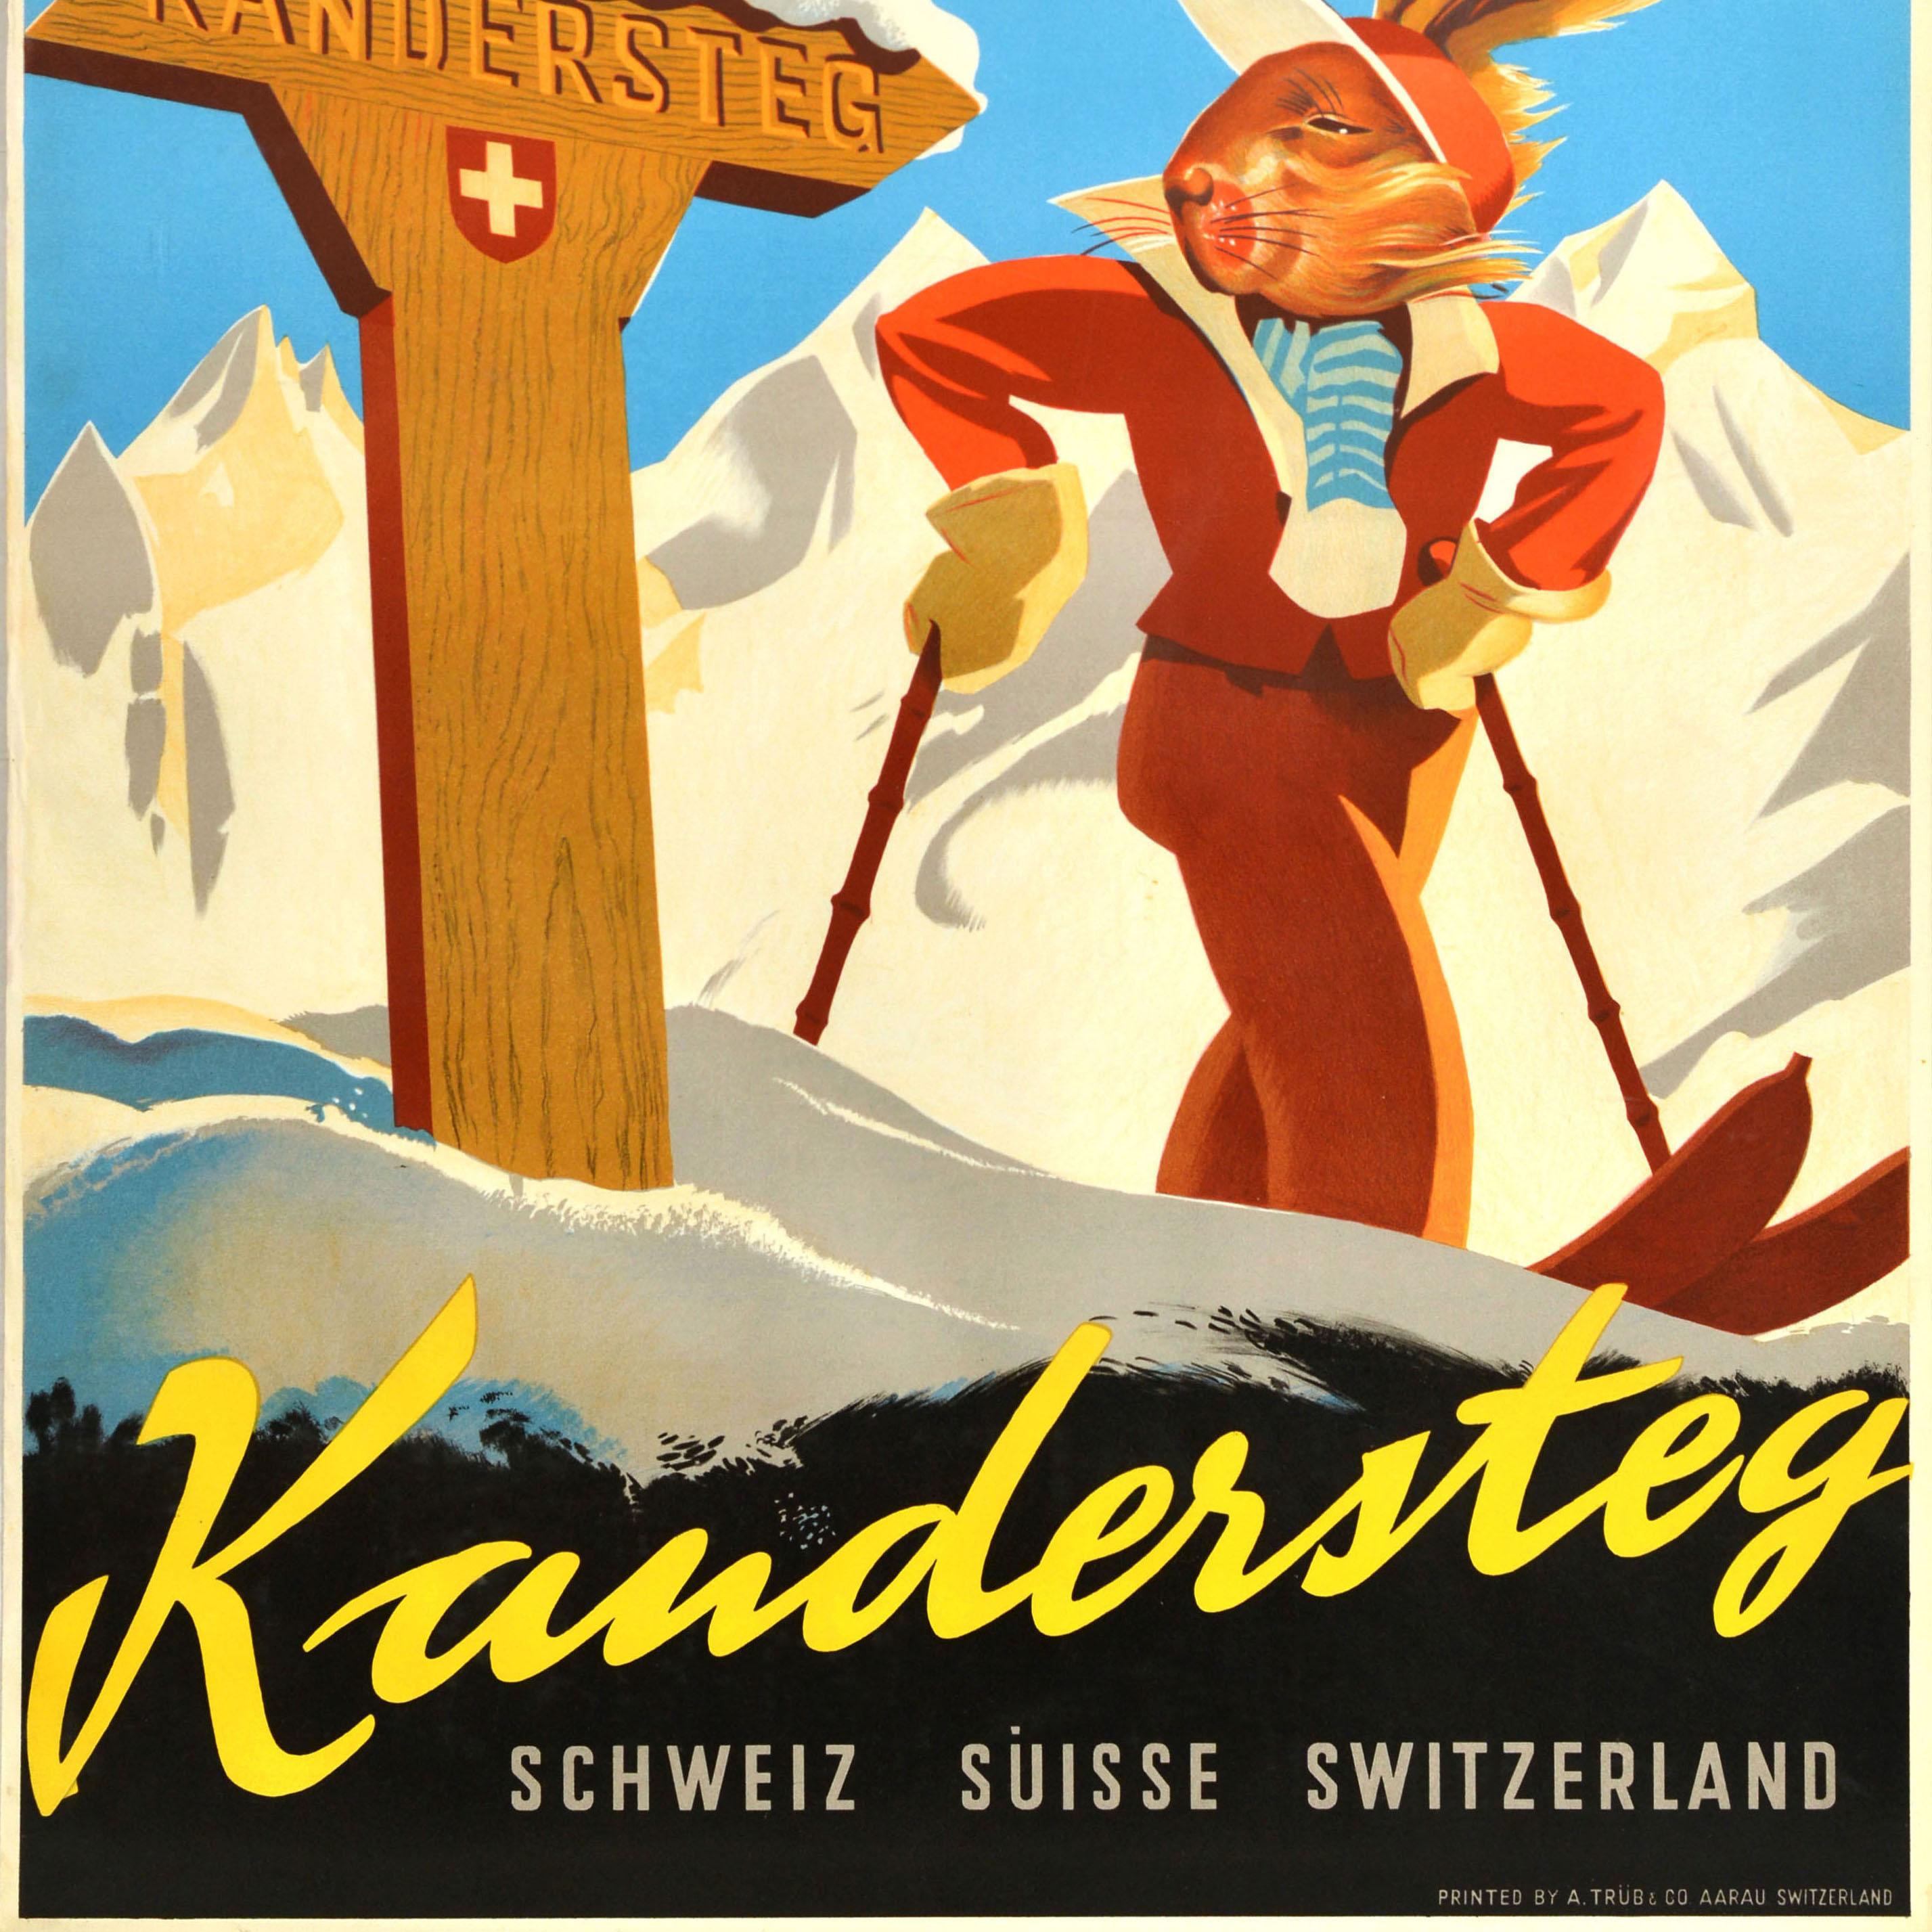 Original vintage winter sports poster for the Swiss alpine resort of Kandersteg Schweiz Suisse Switzerland located in the Bernese Oberland alps featuring a fun illustration of a hare on skis looking at a wooden Kandersteg road sign marked with a